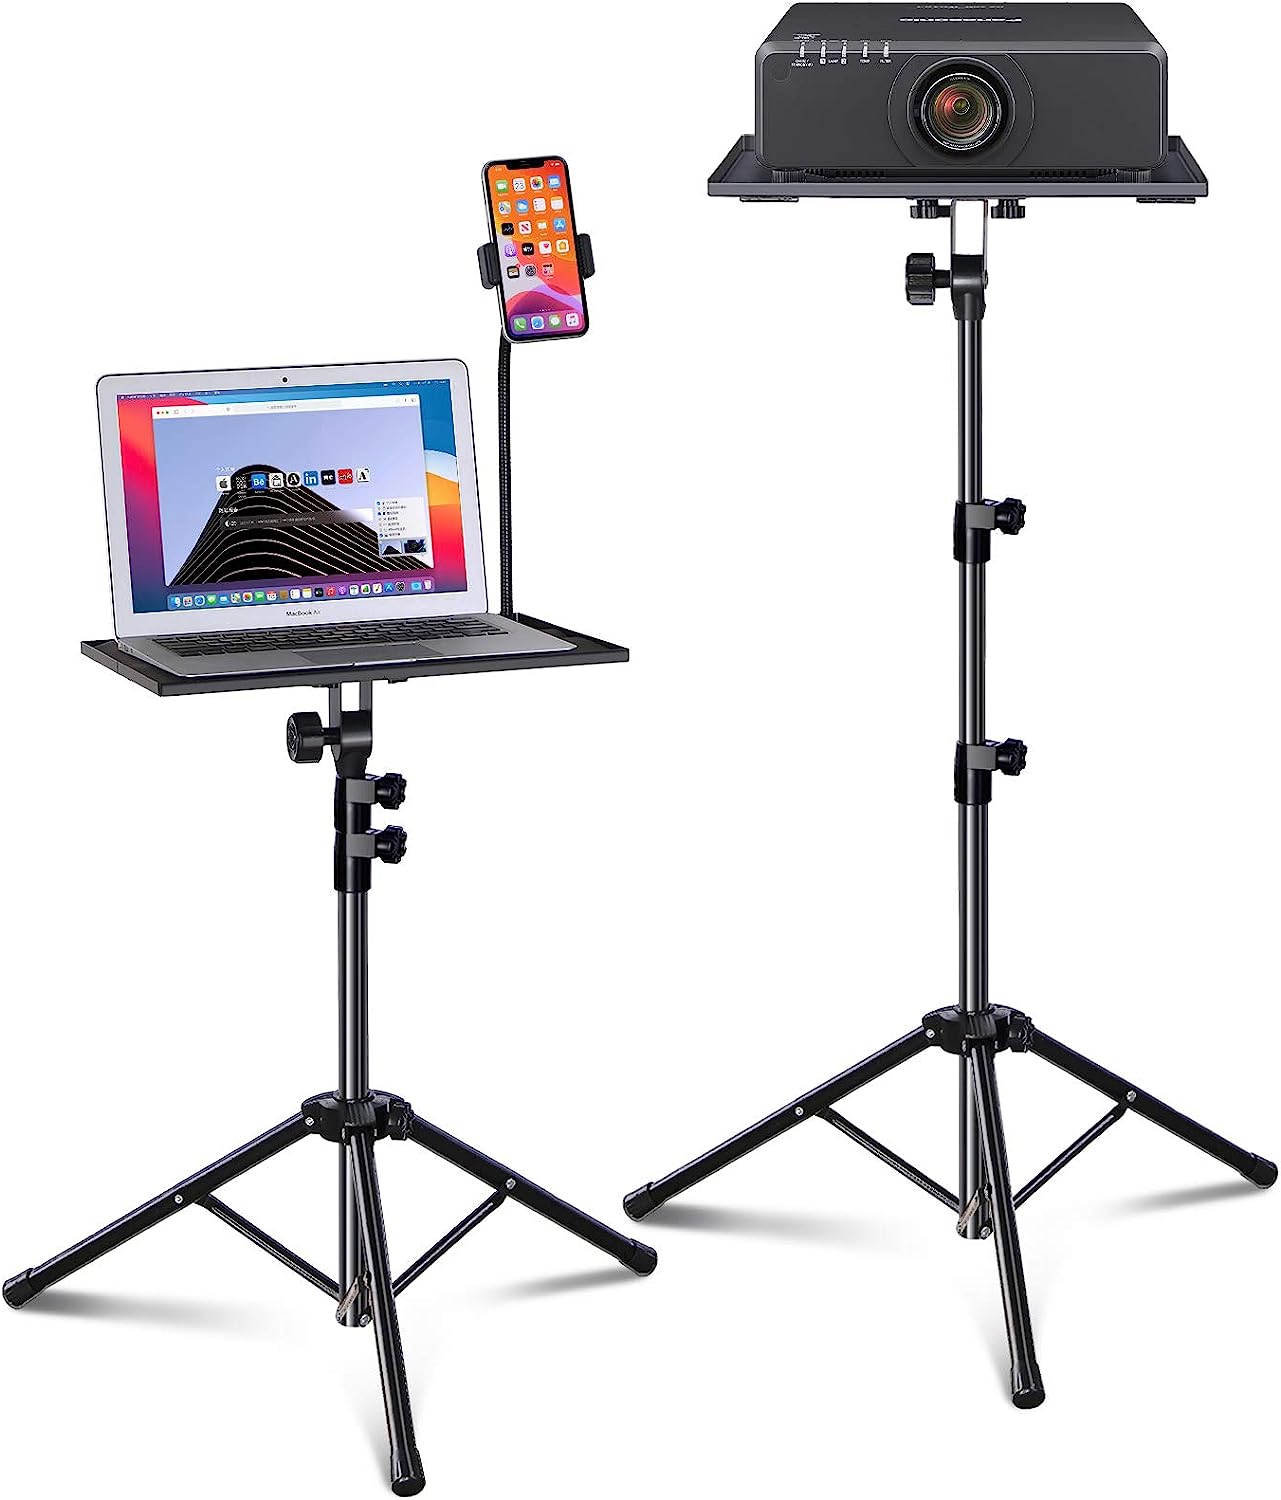 Laptop Tripod, Laptop Stand, Projector Tripod Stand [...]